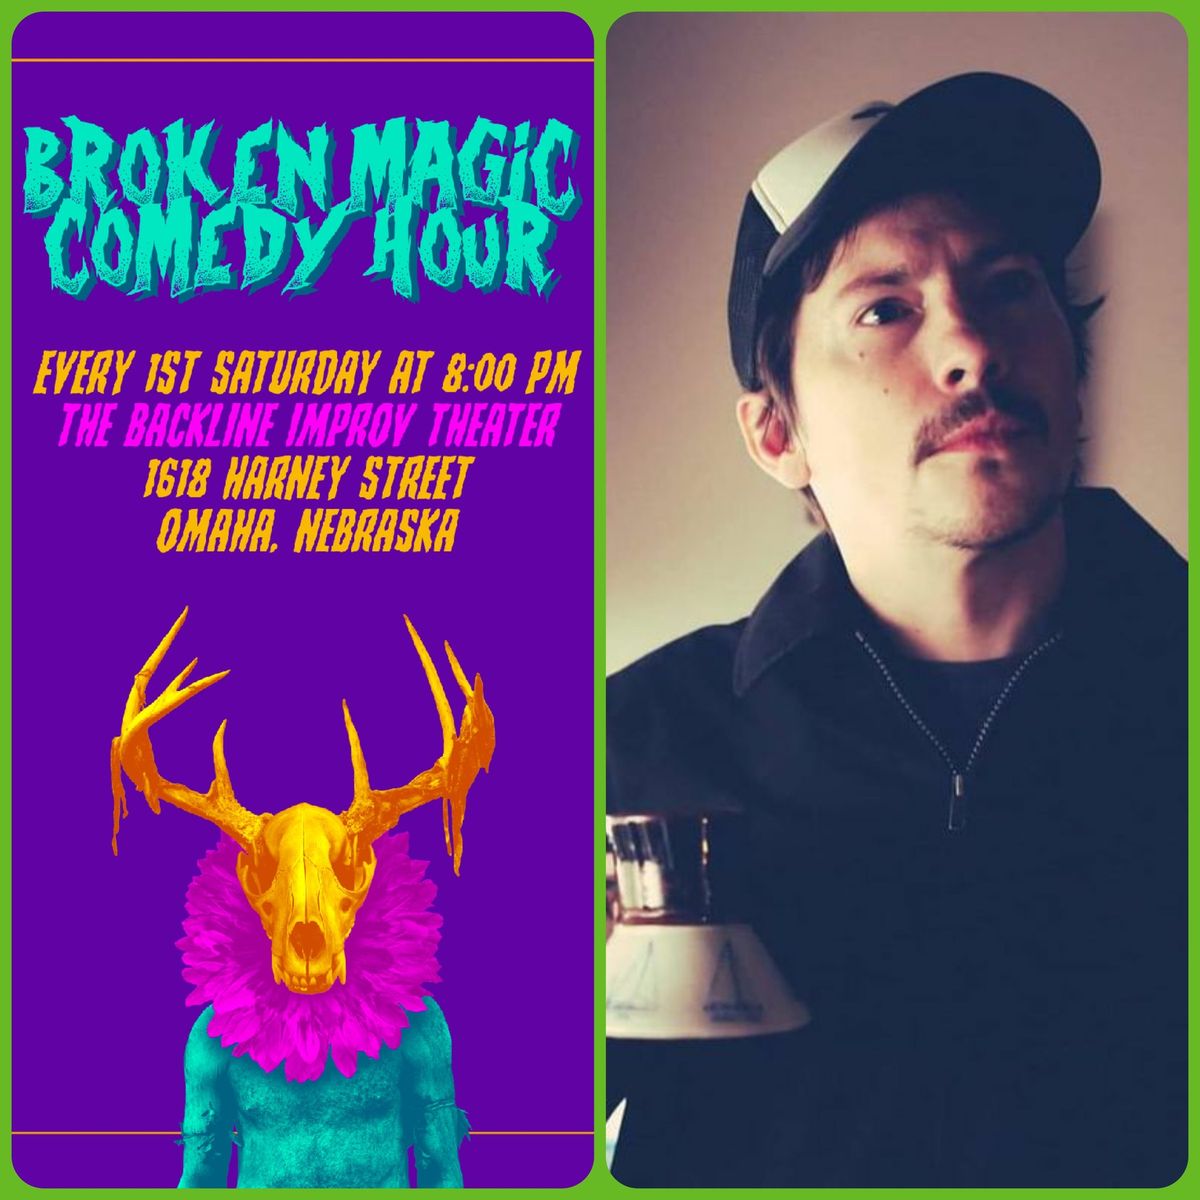 The Broken Magic Comedy Hour Presents Donny Townsend! 